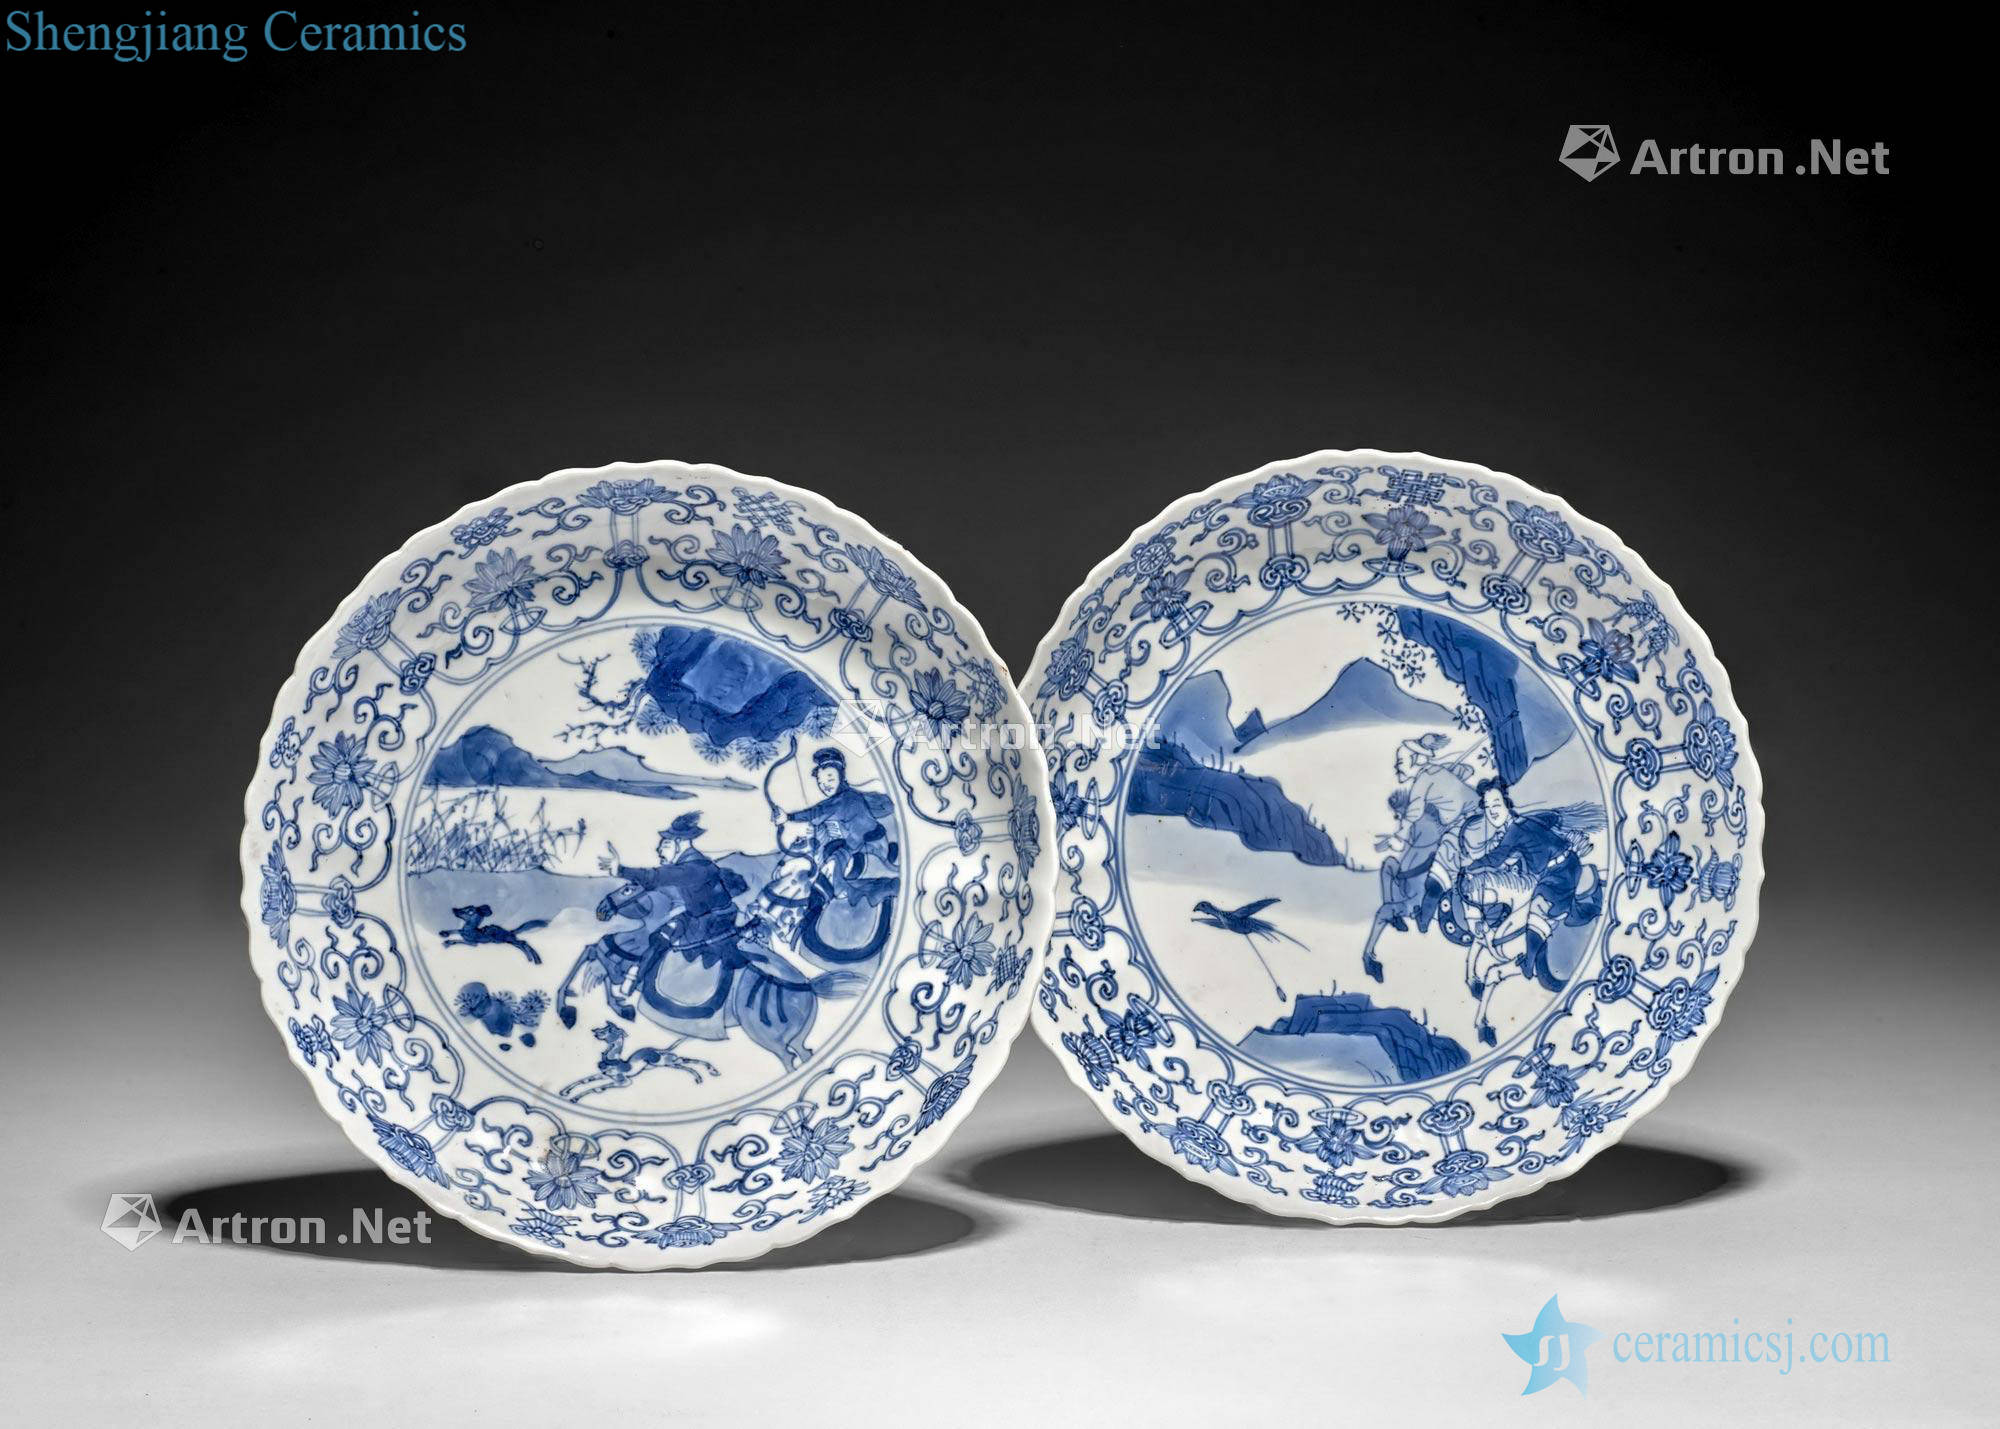 China, the Qing dynasty, Kangxi period (1662-1722), A pair of blue and white porcelain saucers